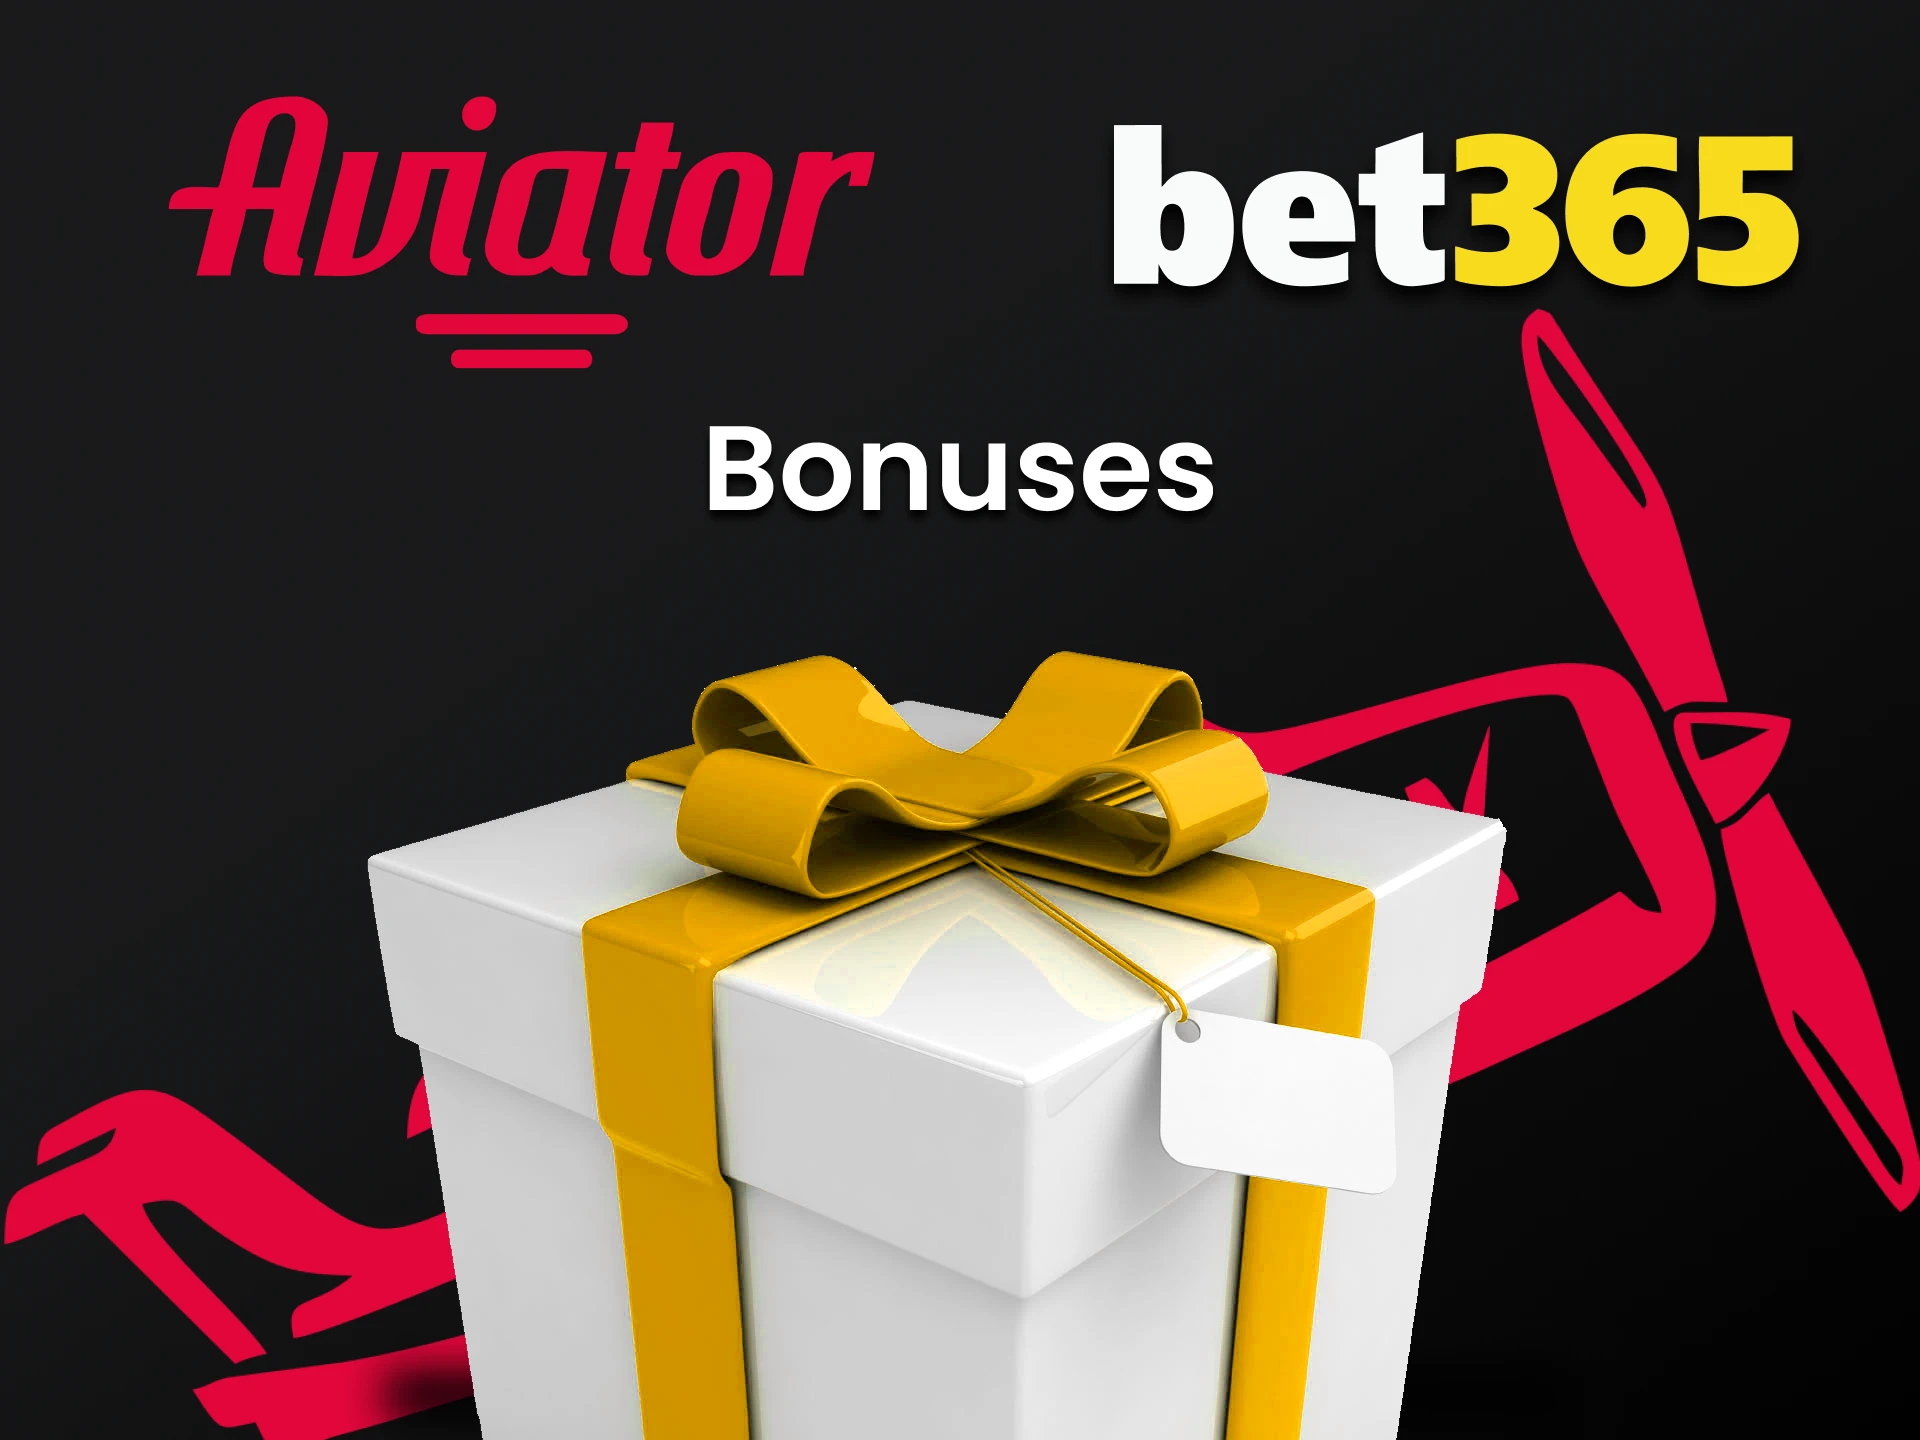 You can get bonuses for the Aviator game from Bet365.